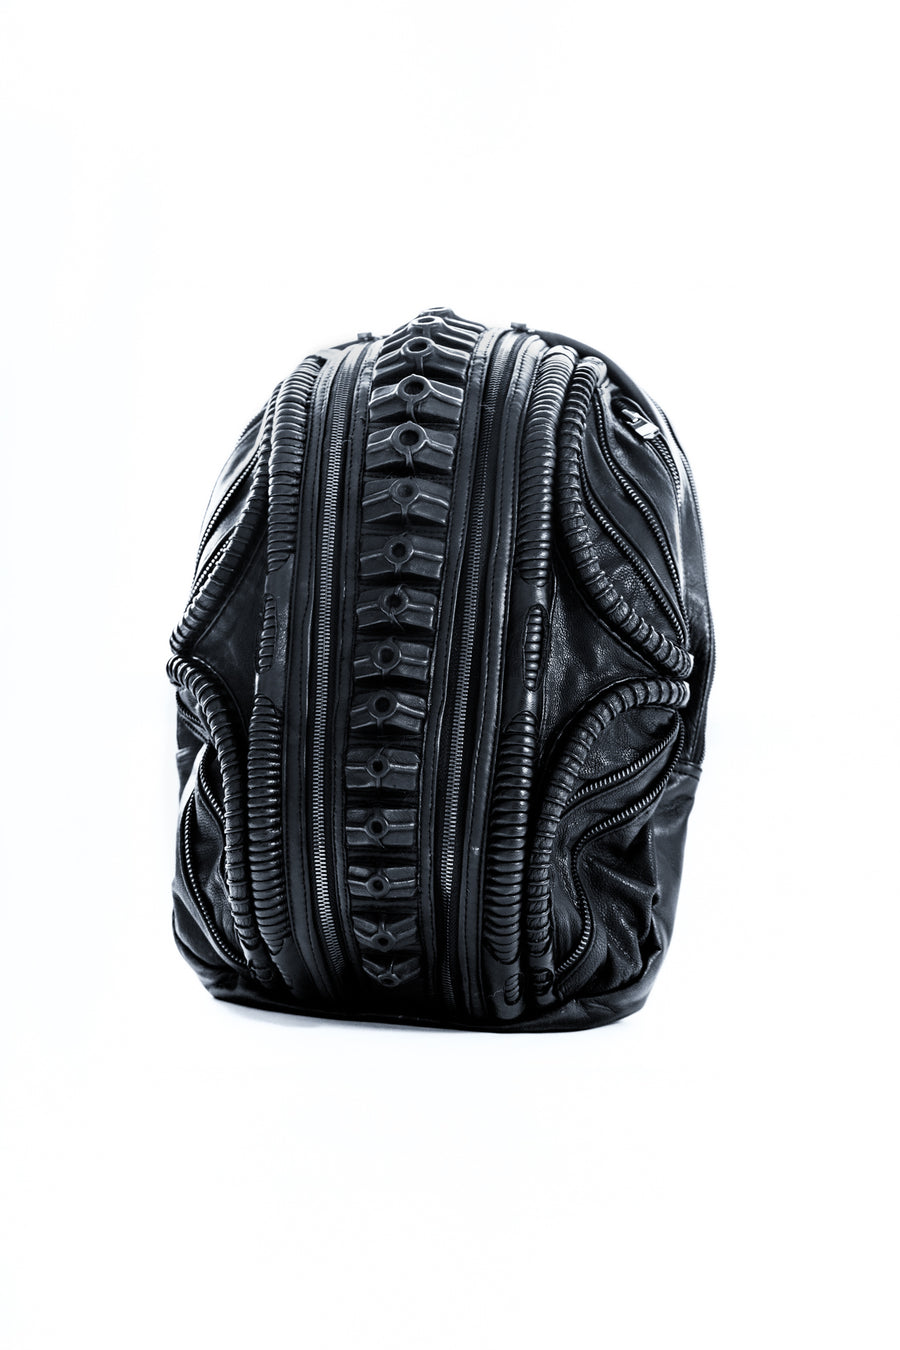 Avant-garde backpack in dark post-apocalyptic fashion and leather handcrafted detail